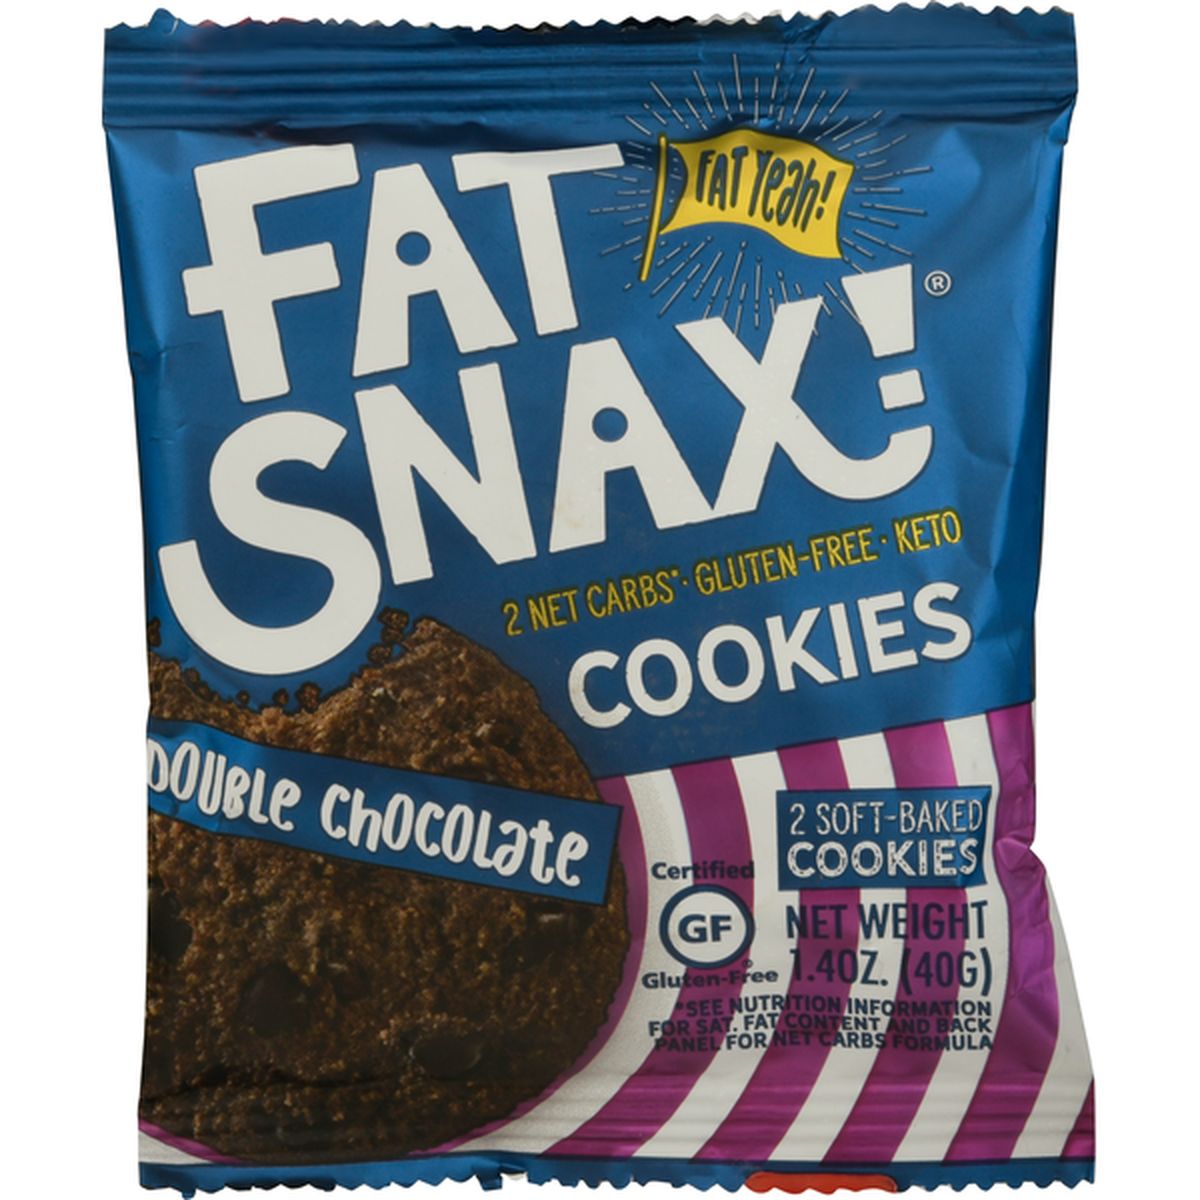 Calories in Fat Snax Cookies, Double Chocolate